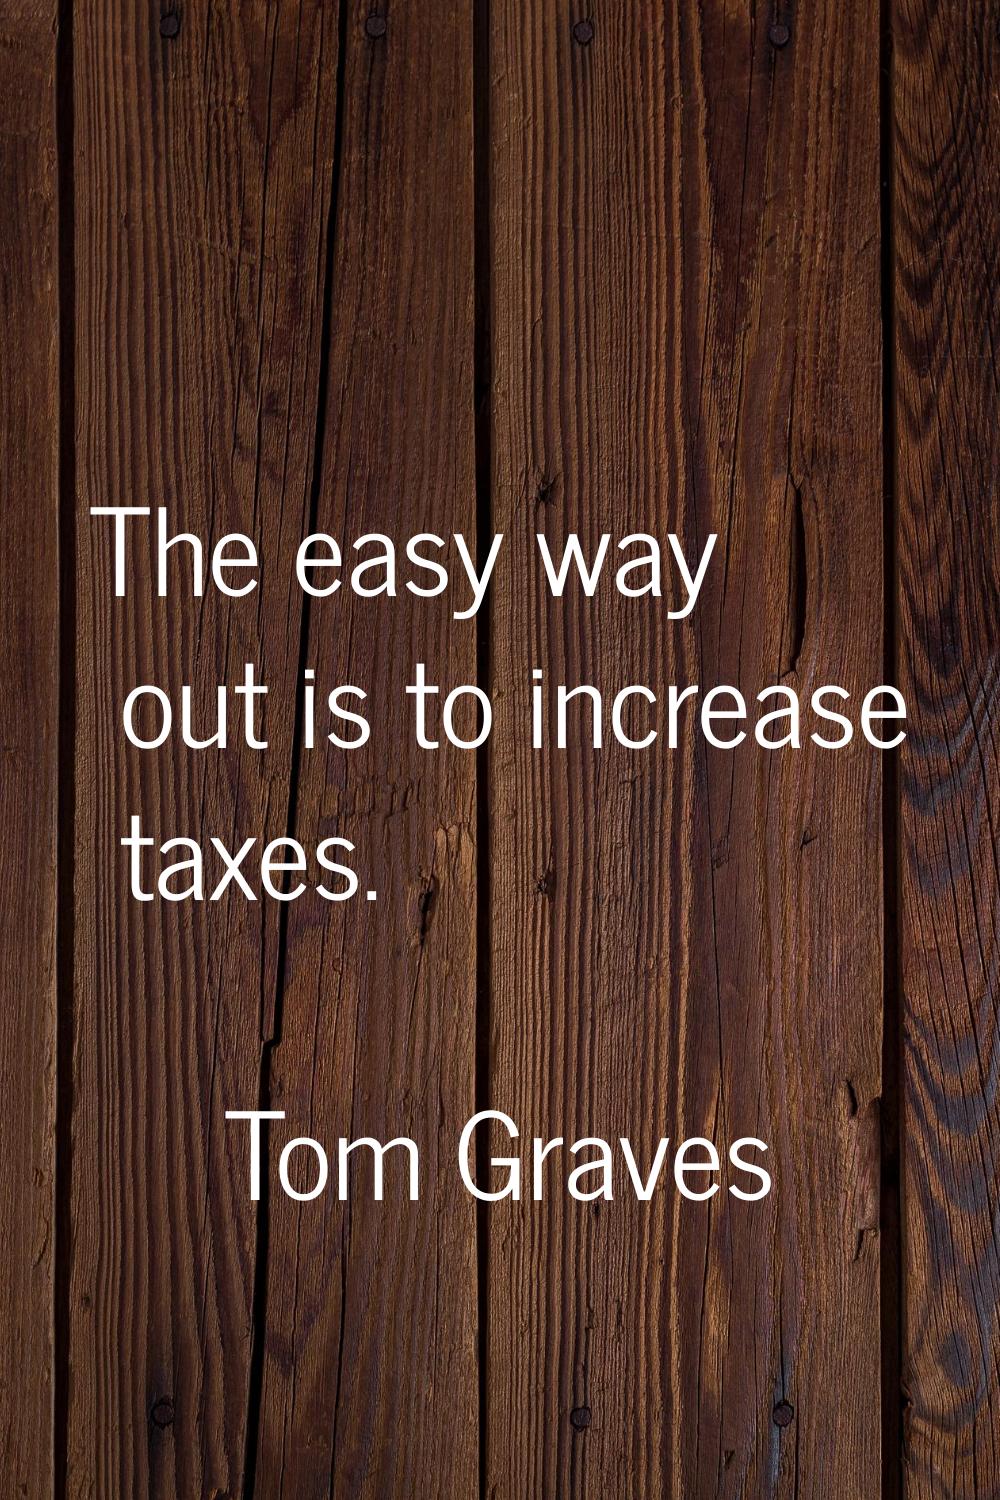 The easy way out is to increase taxes.